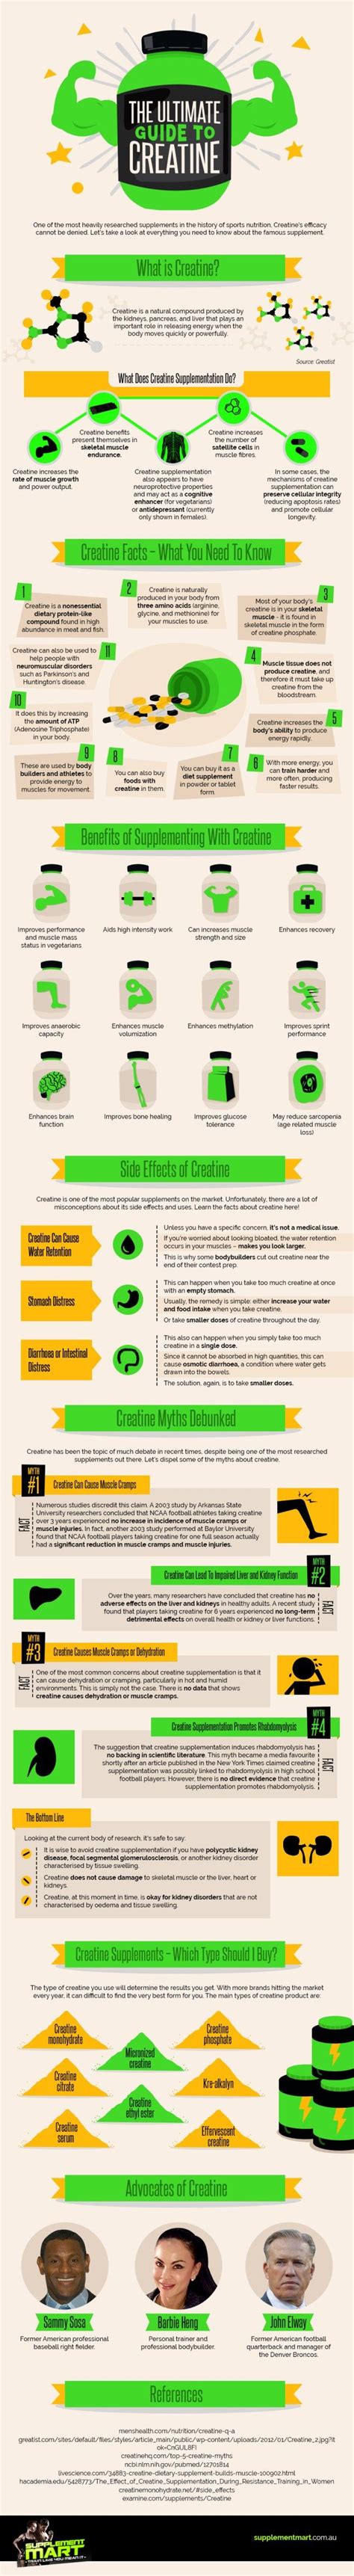 How Does Creatine Work The Ultimate Guide [infographic